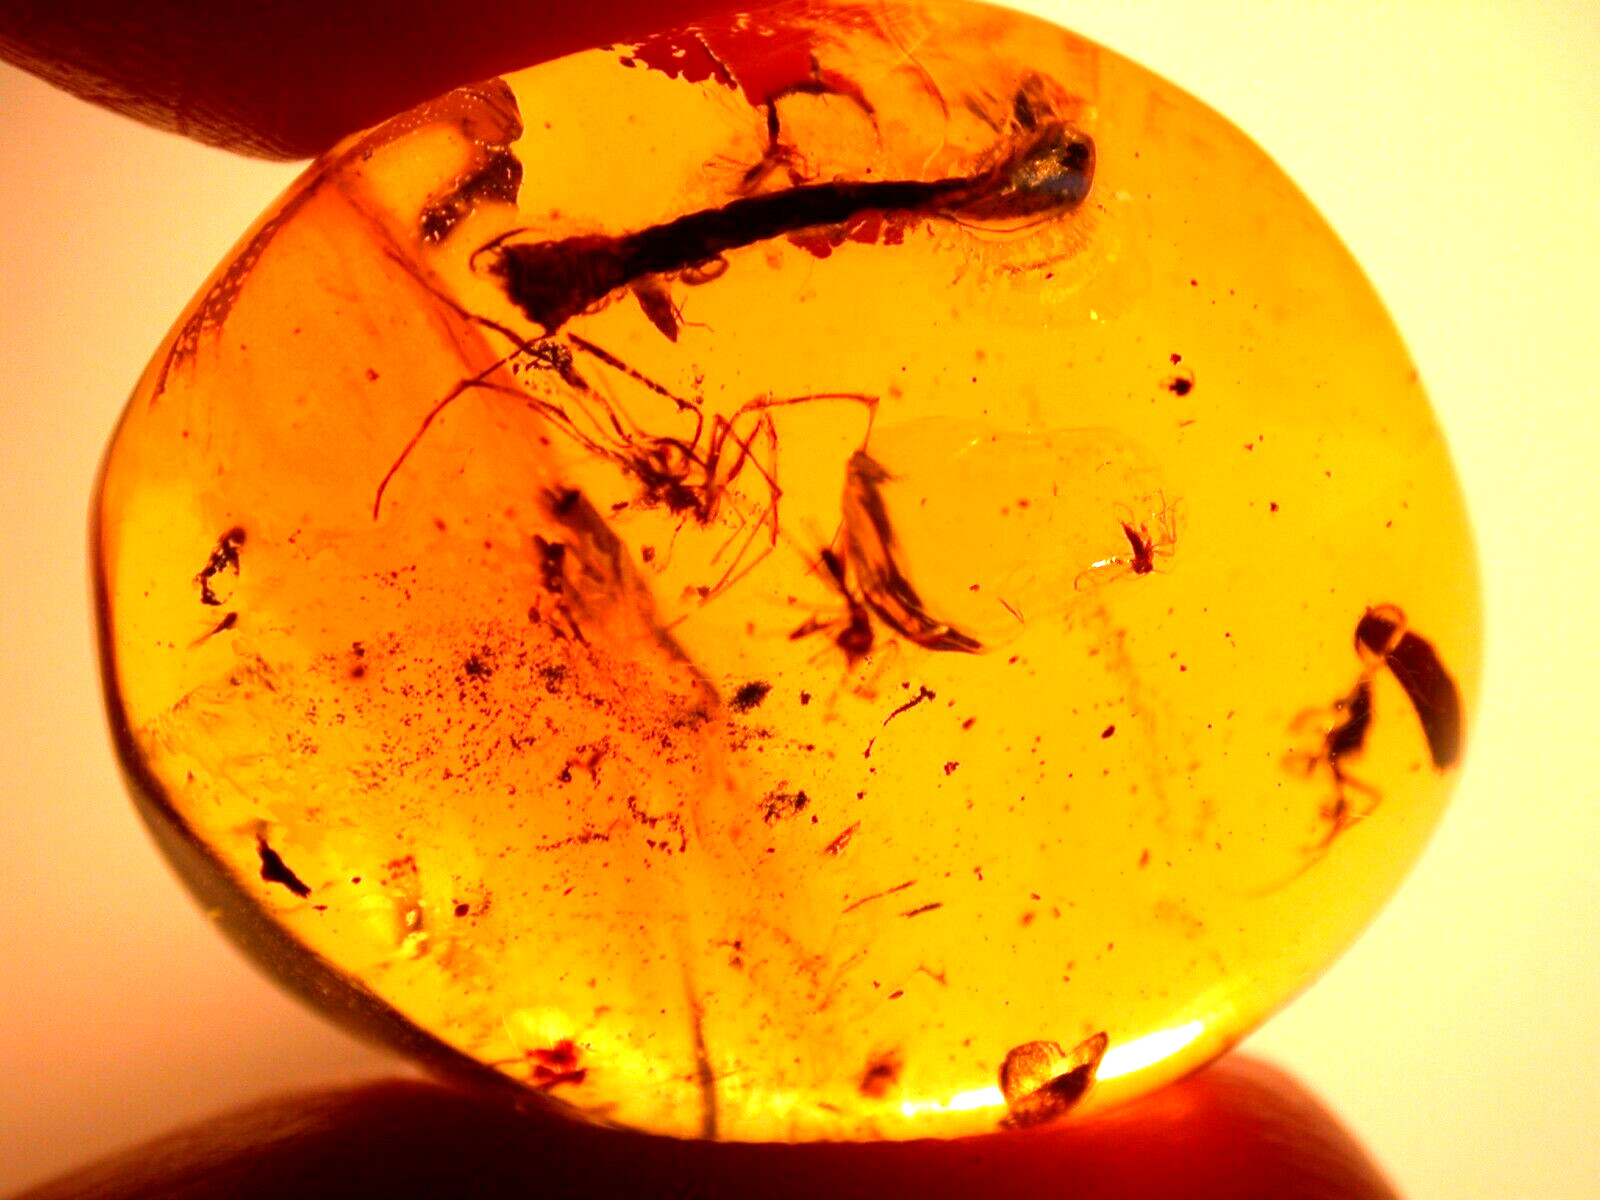 Spider with Long Legs Twig Leaf Insects in Dominican Amber Fossil Lots to See